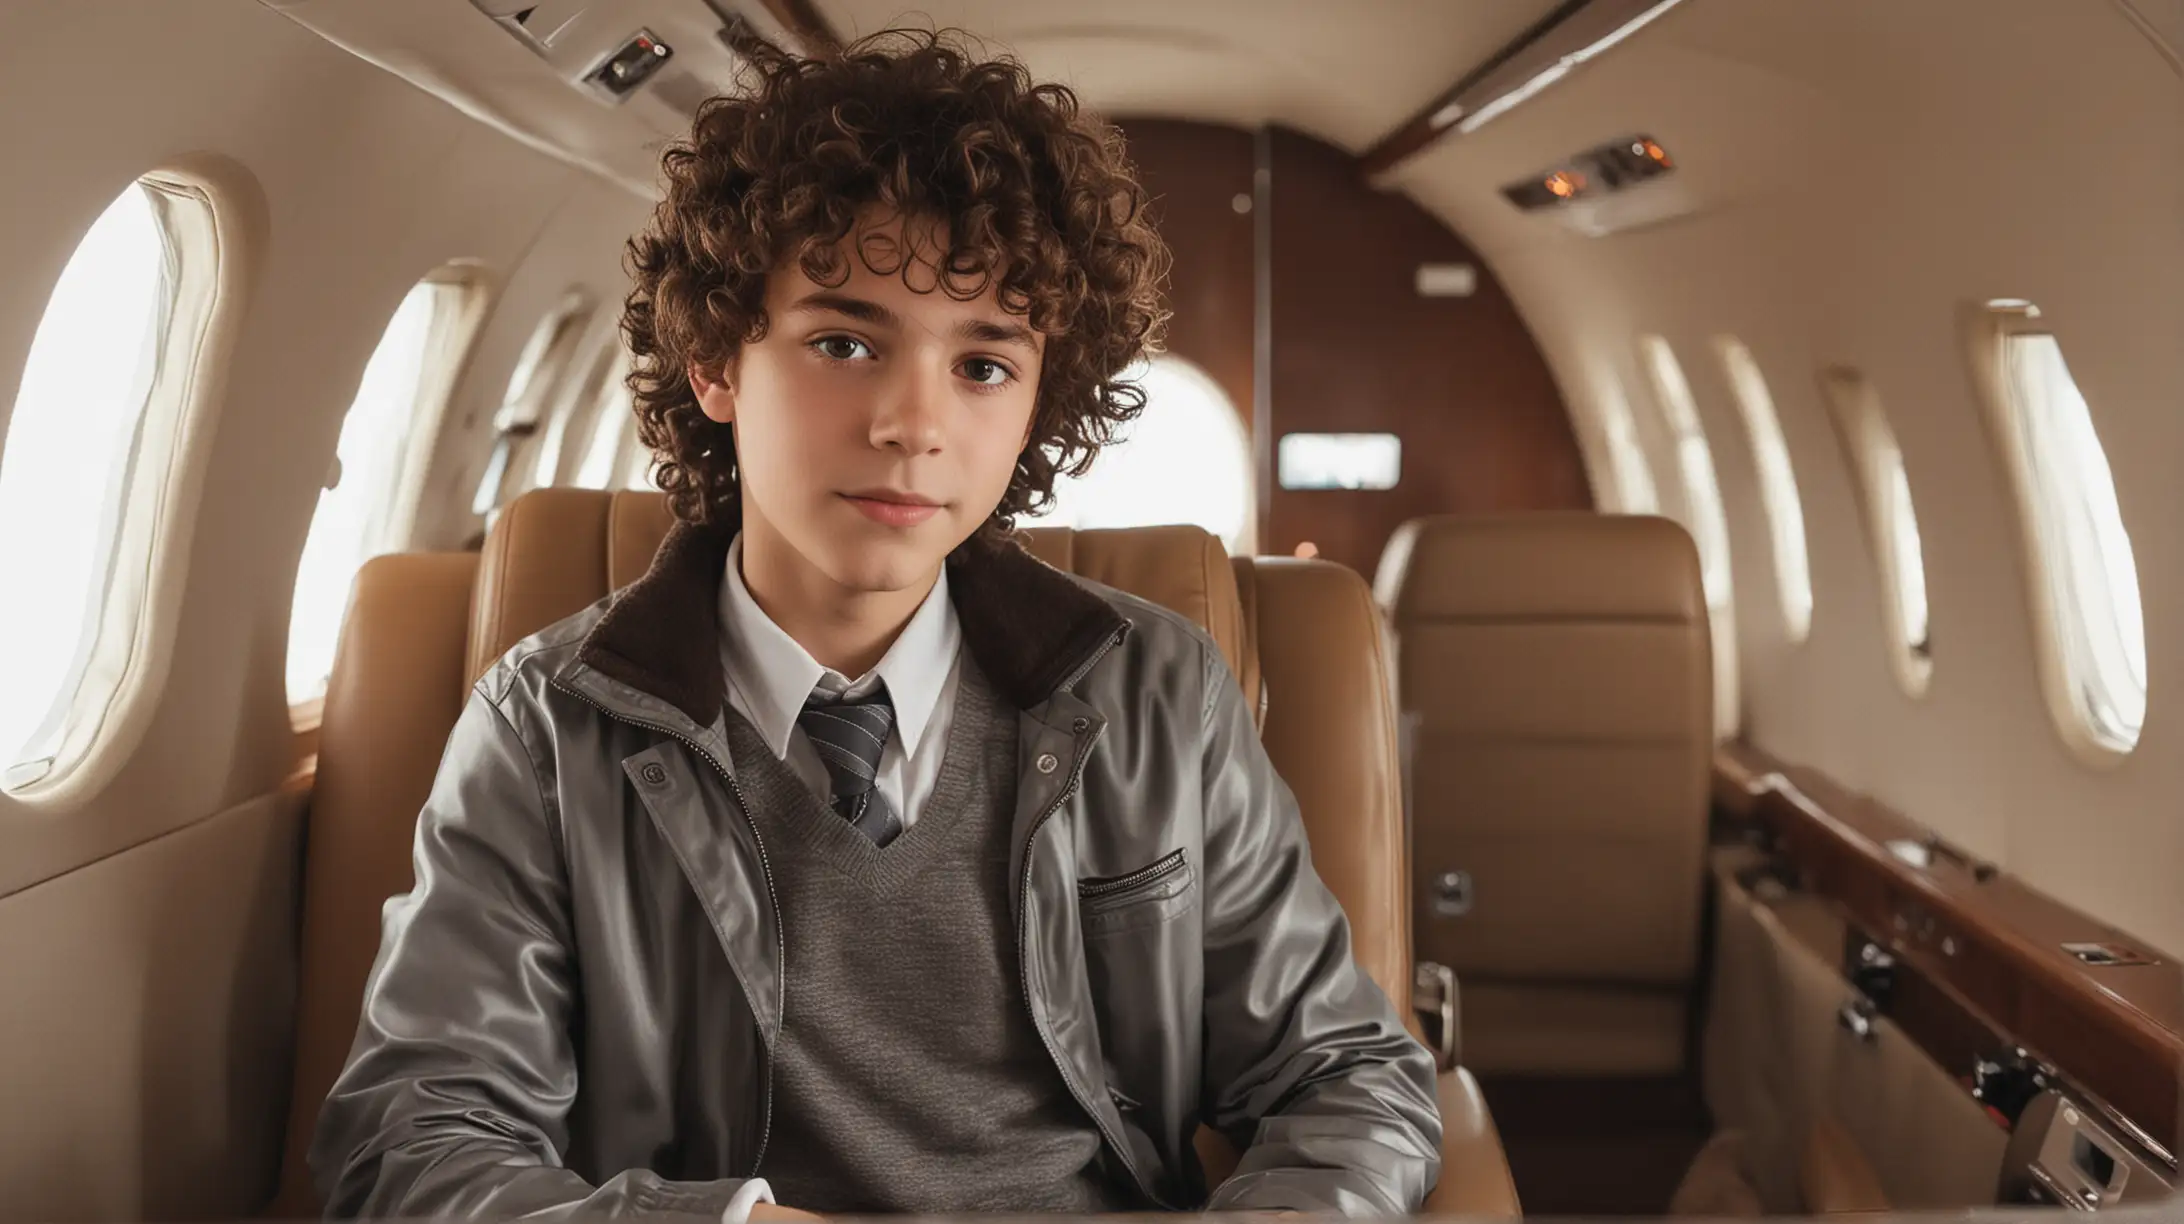 Curly Hair Boy Inside Private Jet